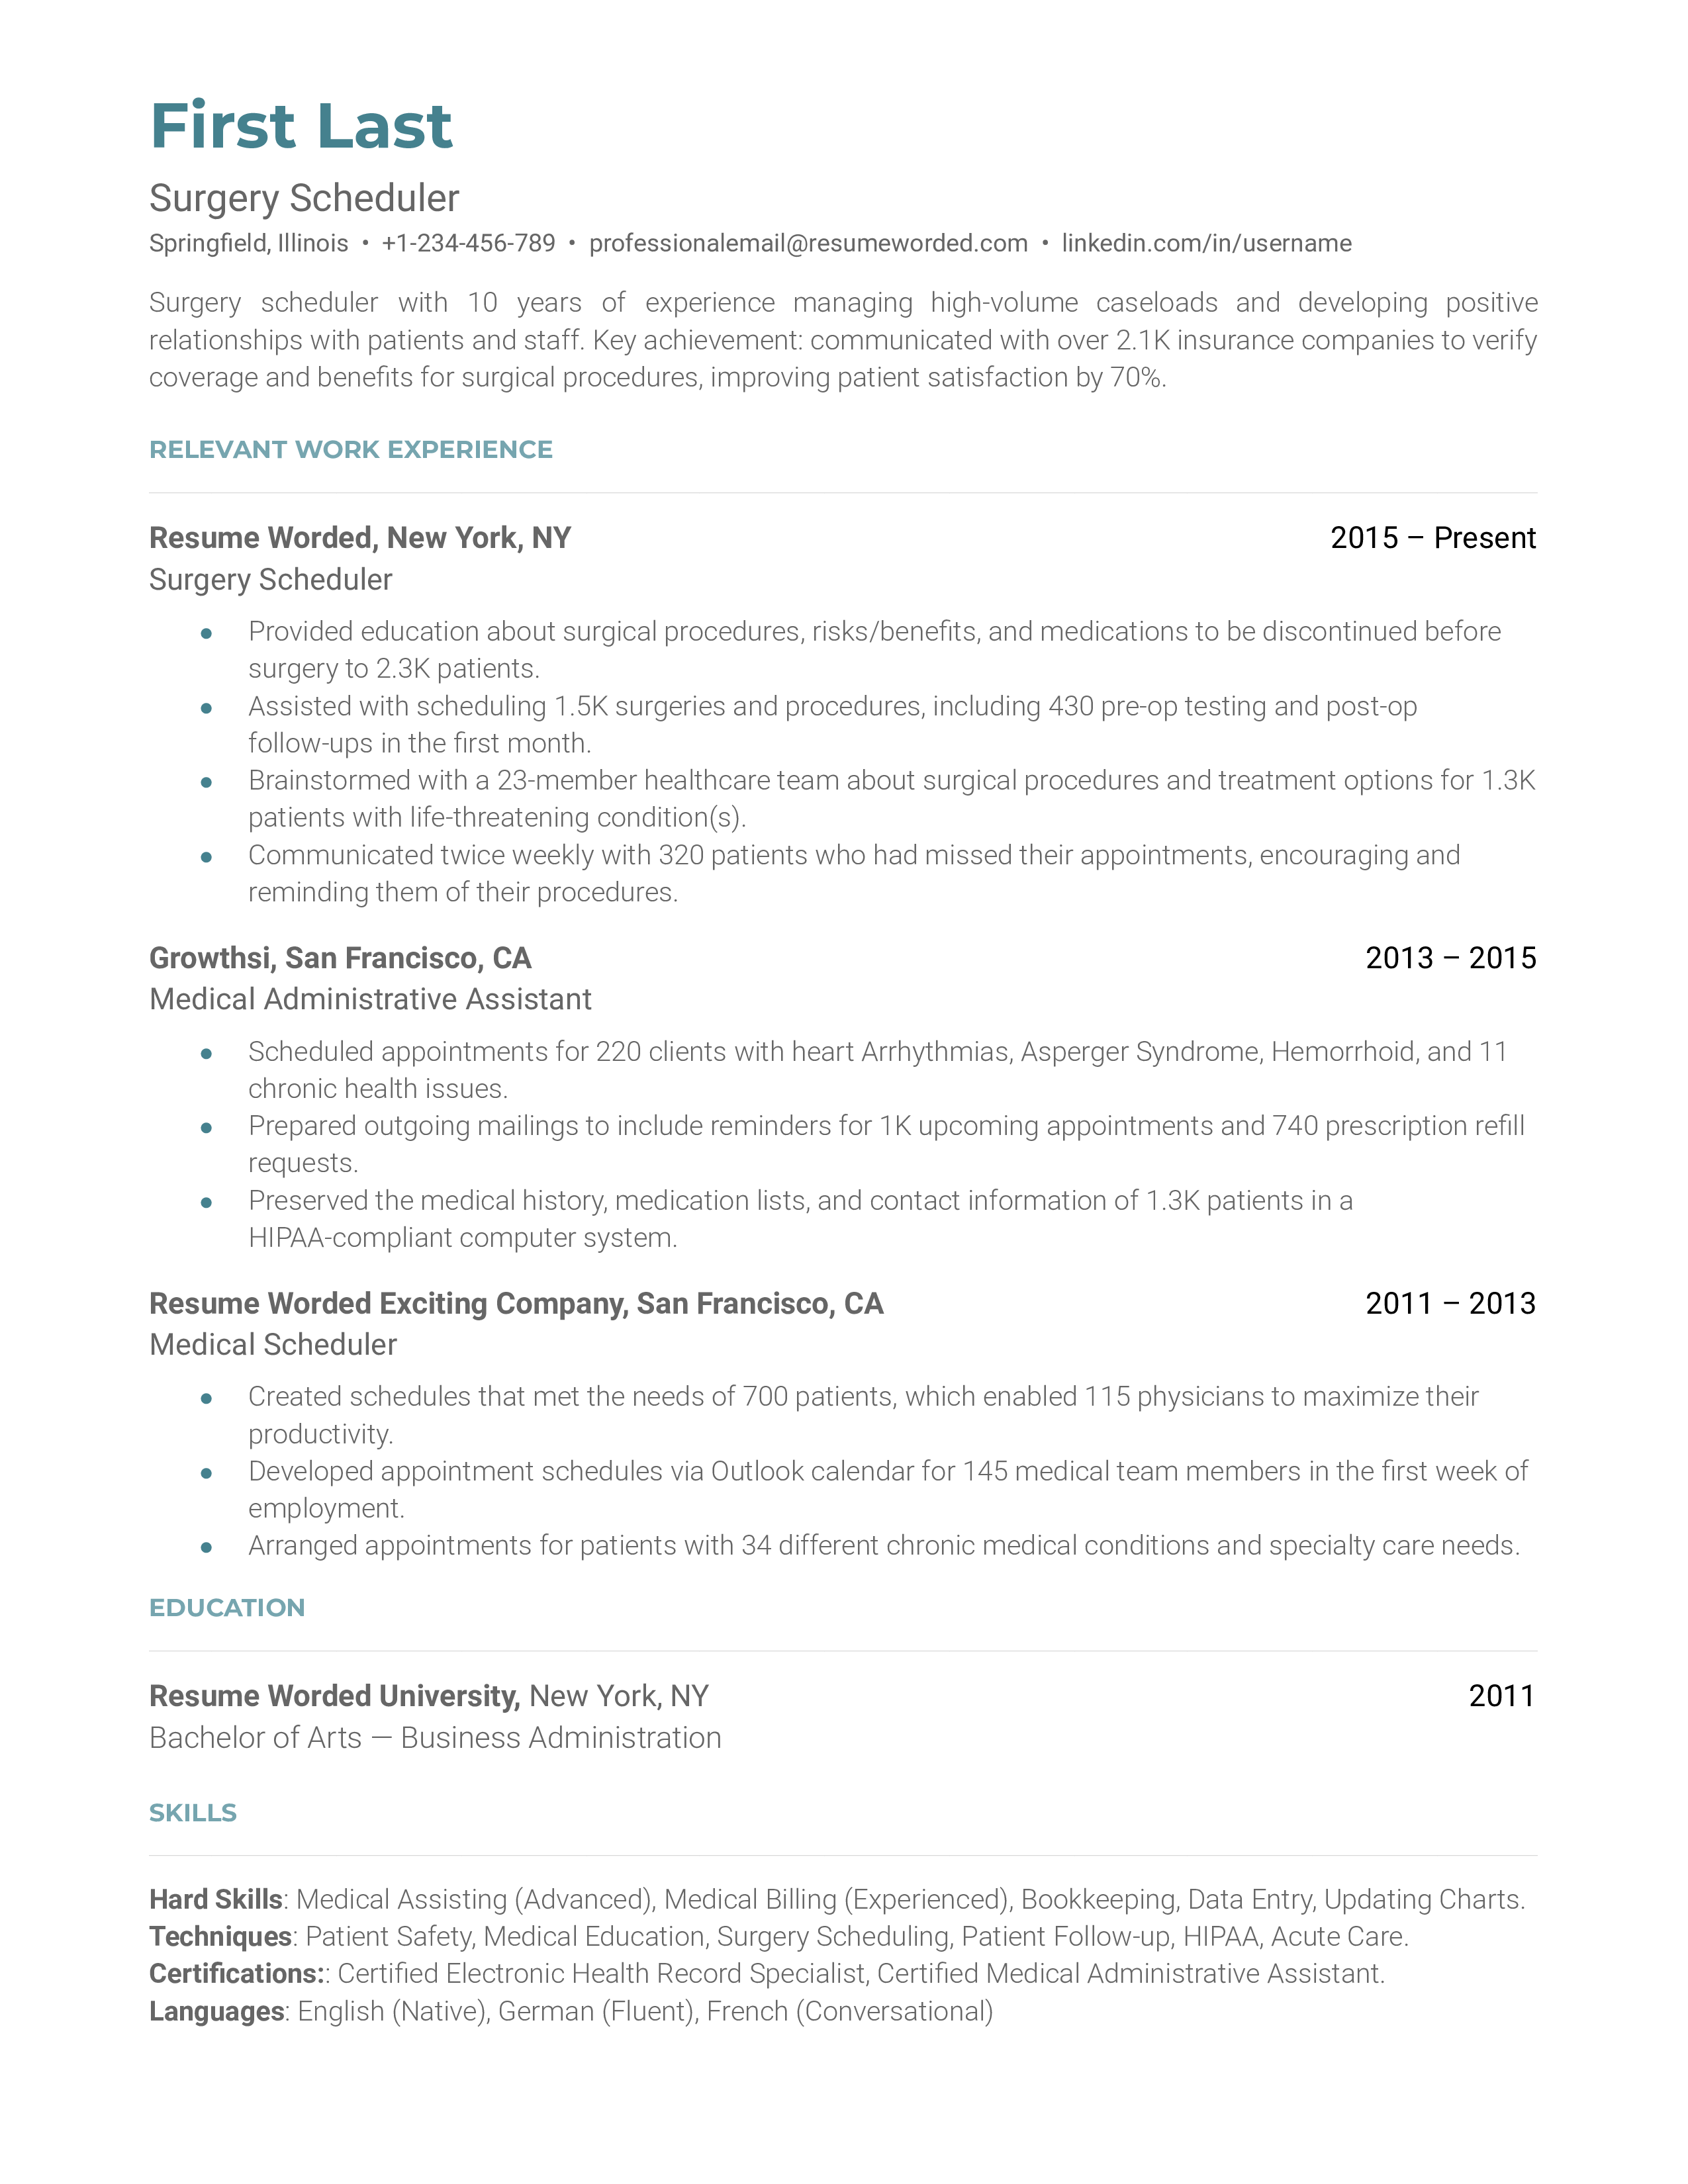 A surgery scheduler resume template including relevant work experience, skills, and education 